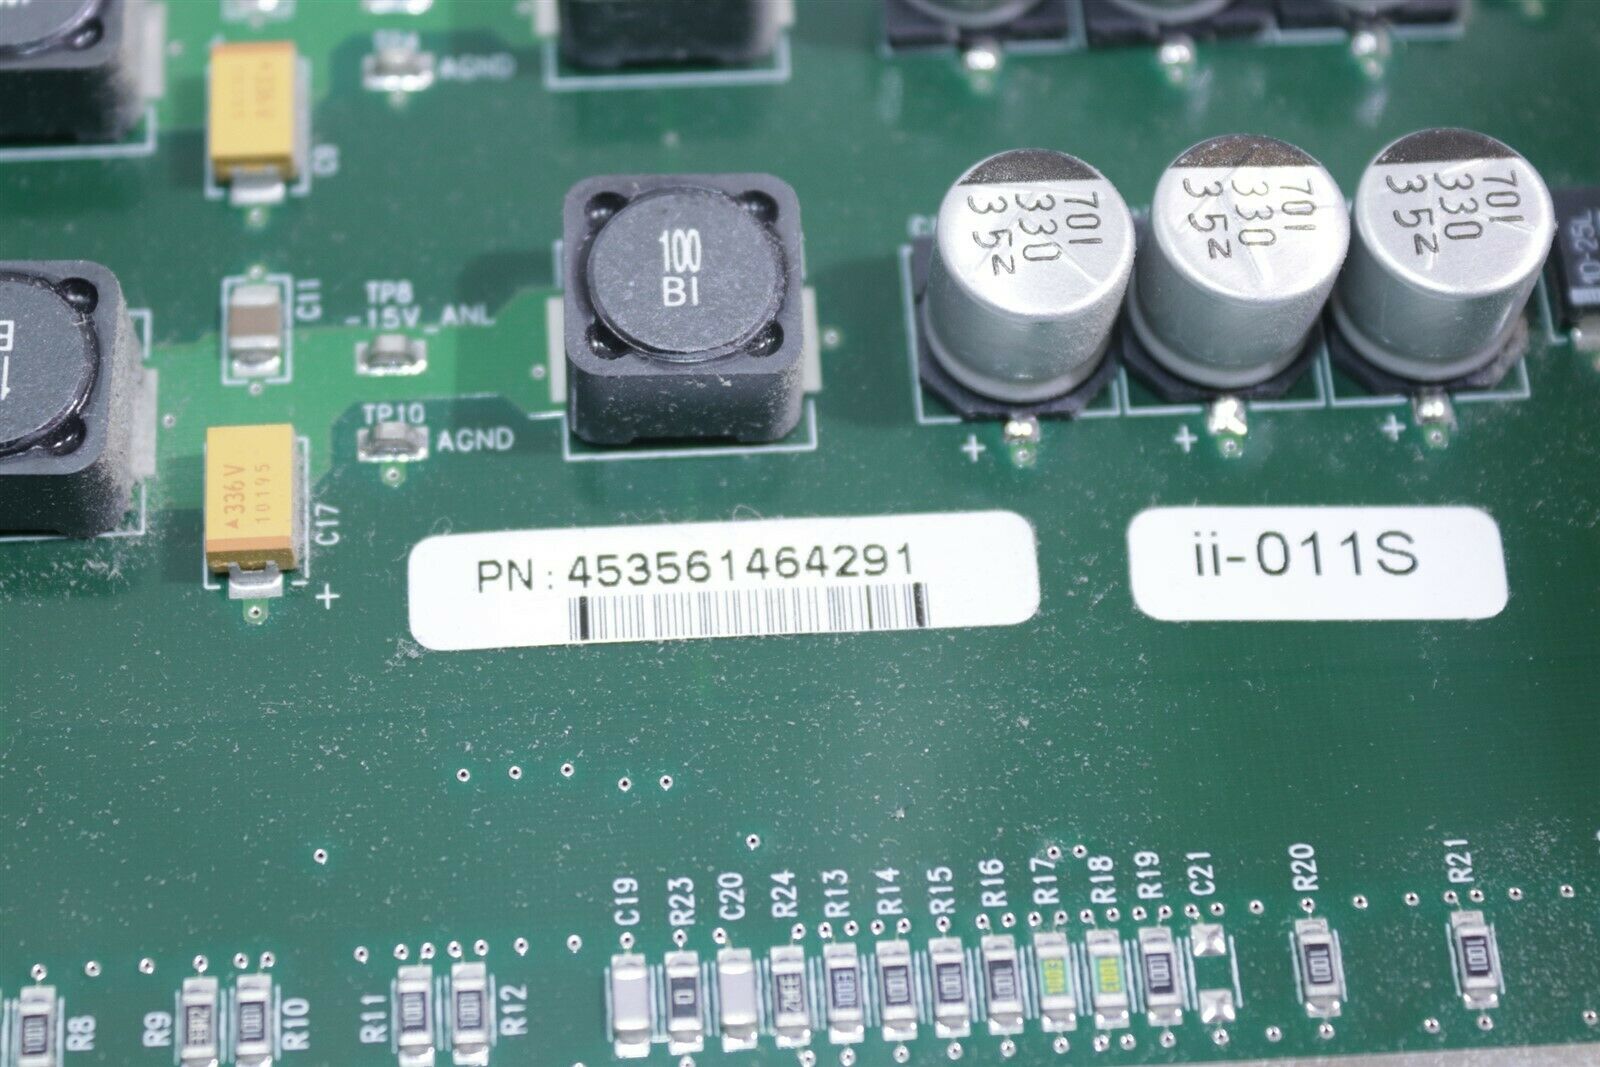 Philips IE33 Ultrasound Front End Controller Board Assy 453561464291 DIAGNOSTIC ULTRASOUND MACHINES FOR SALE